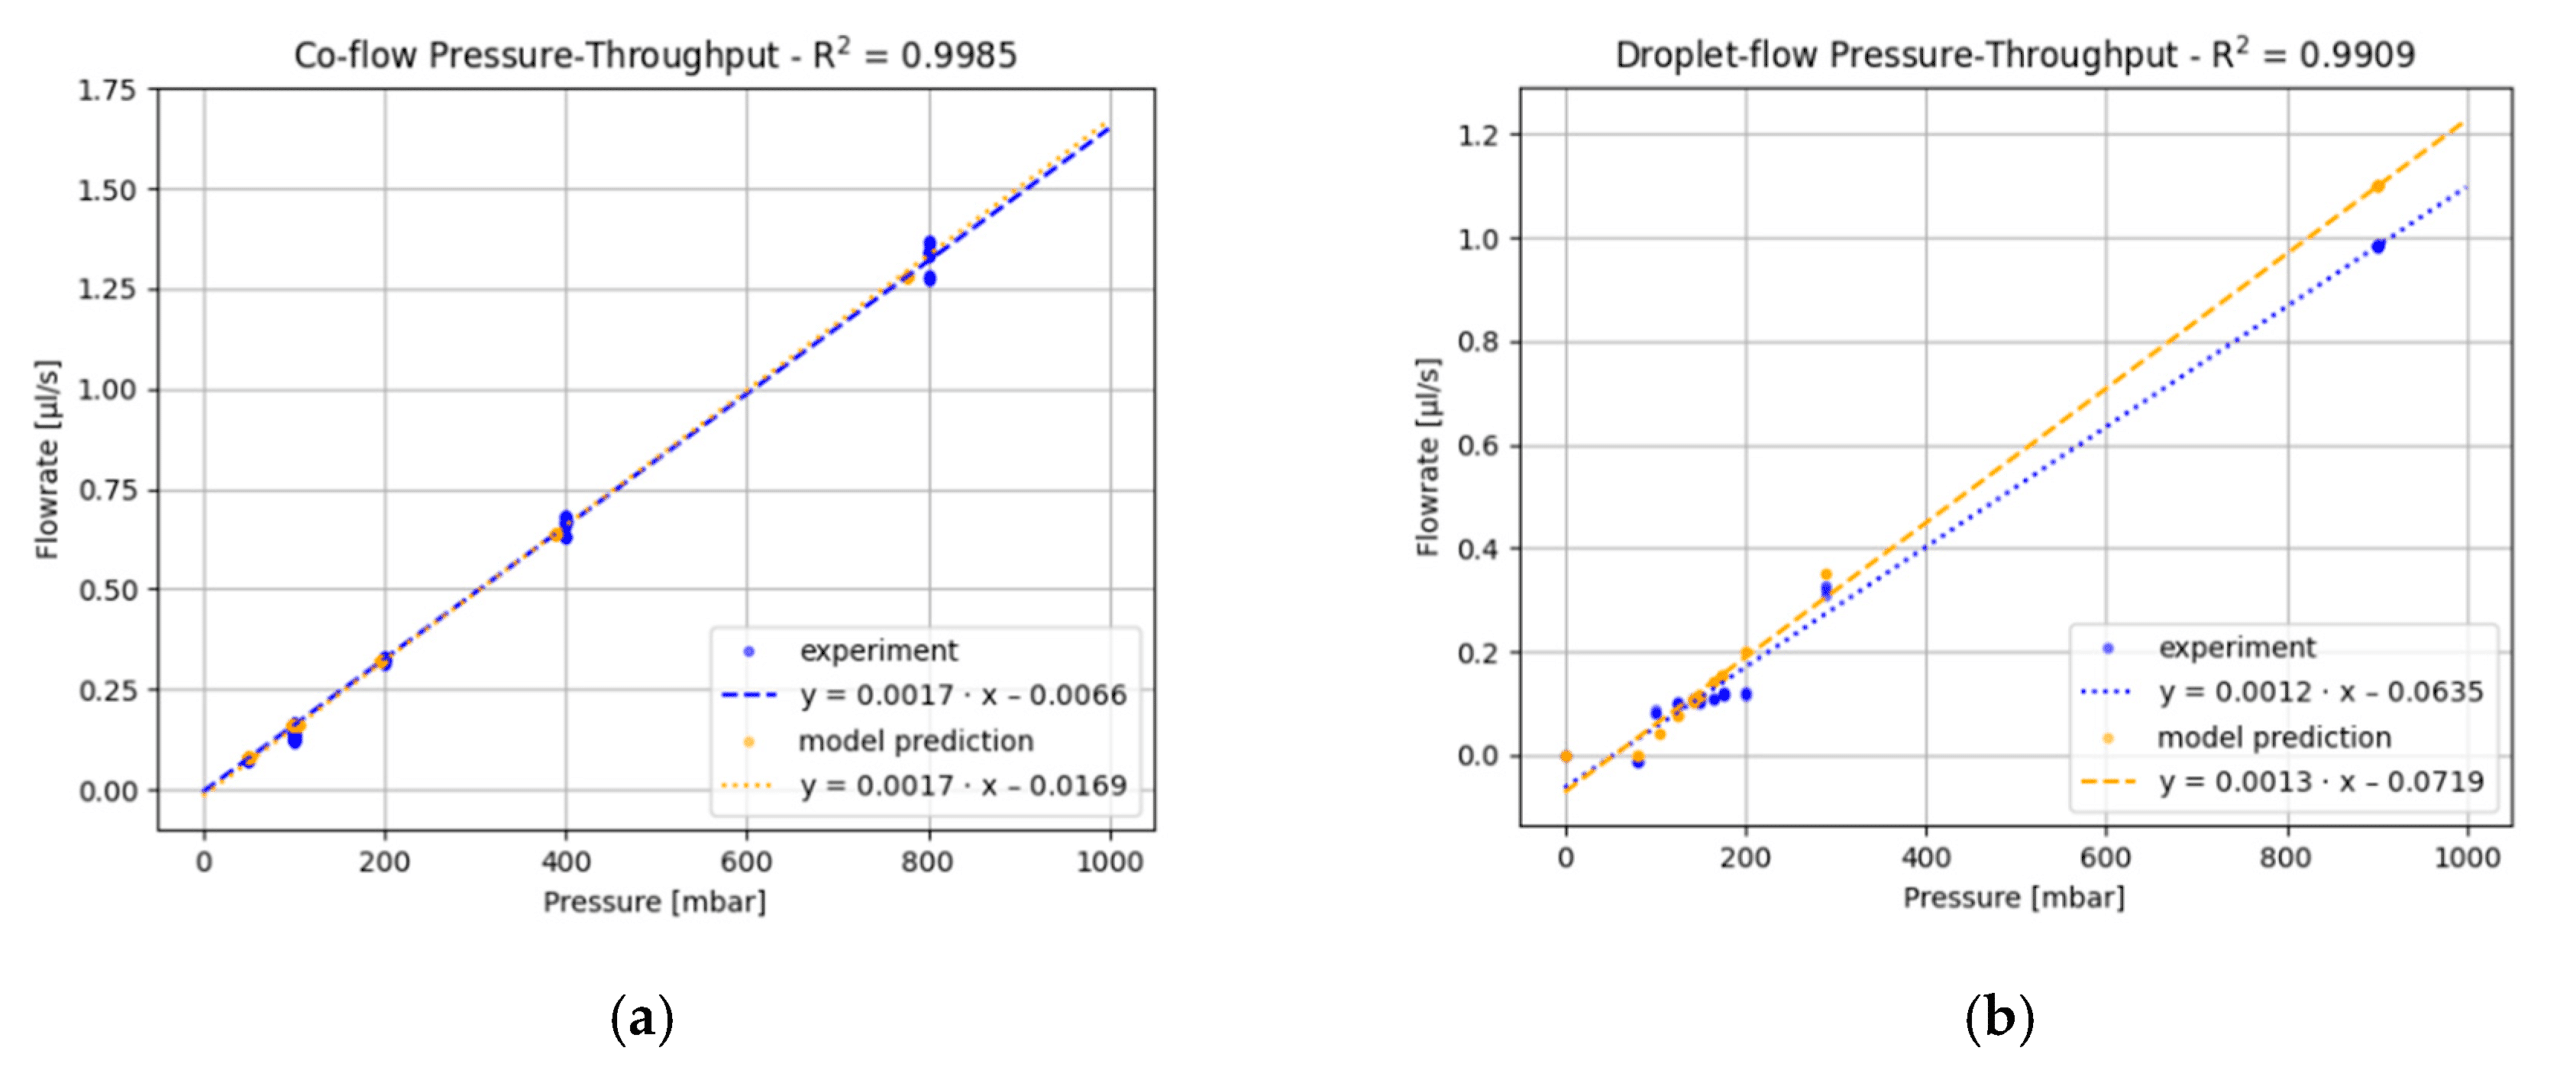 comparison between the flow rate predictions and droplet flow